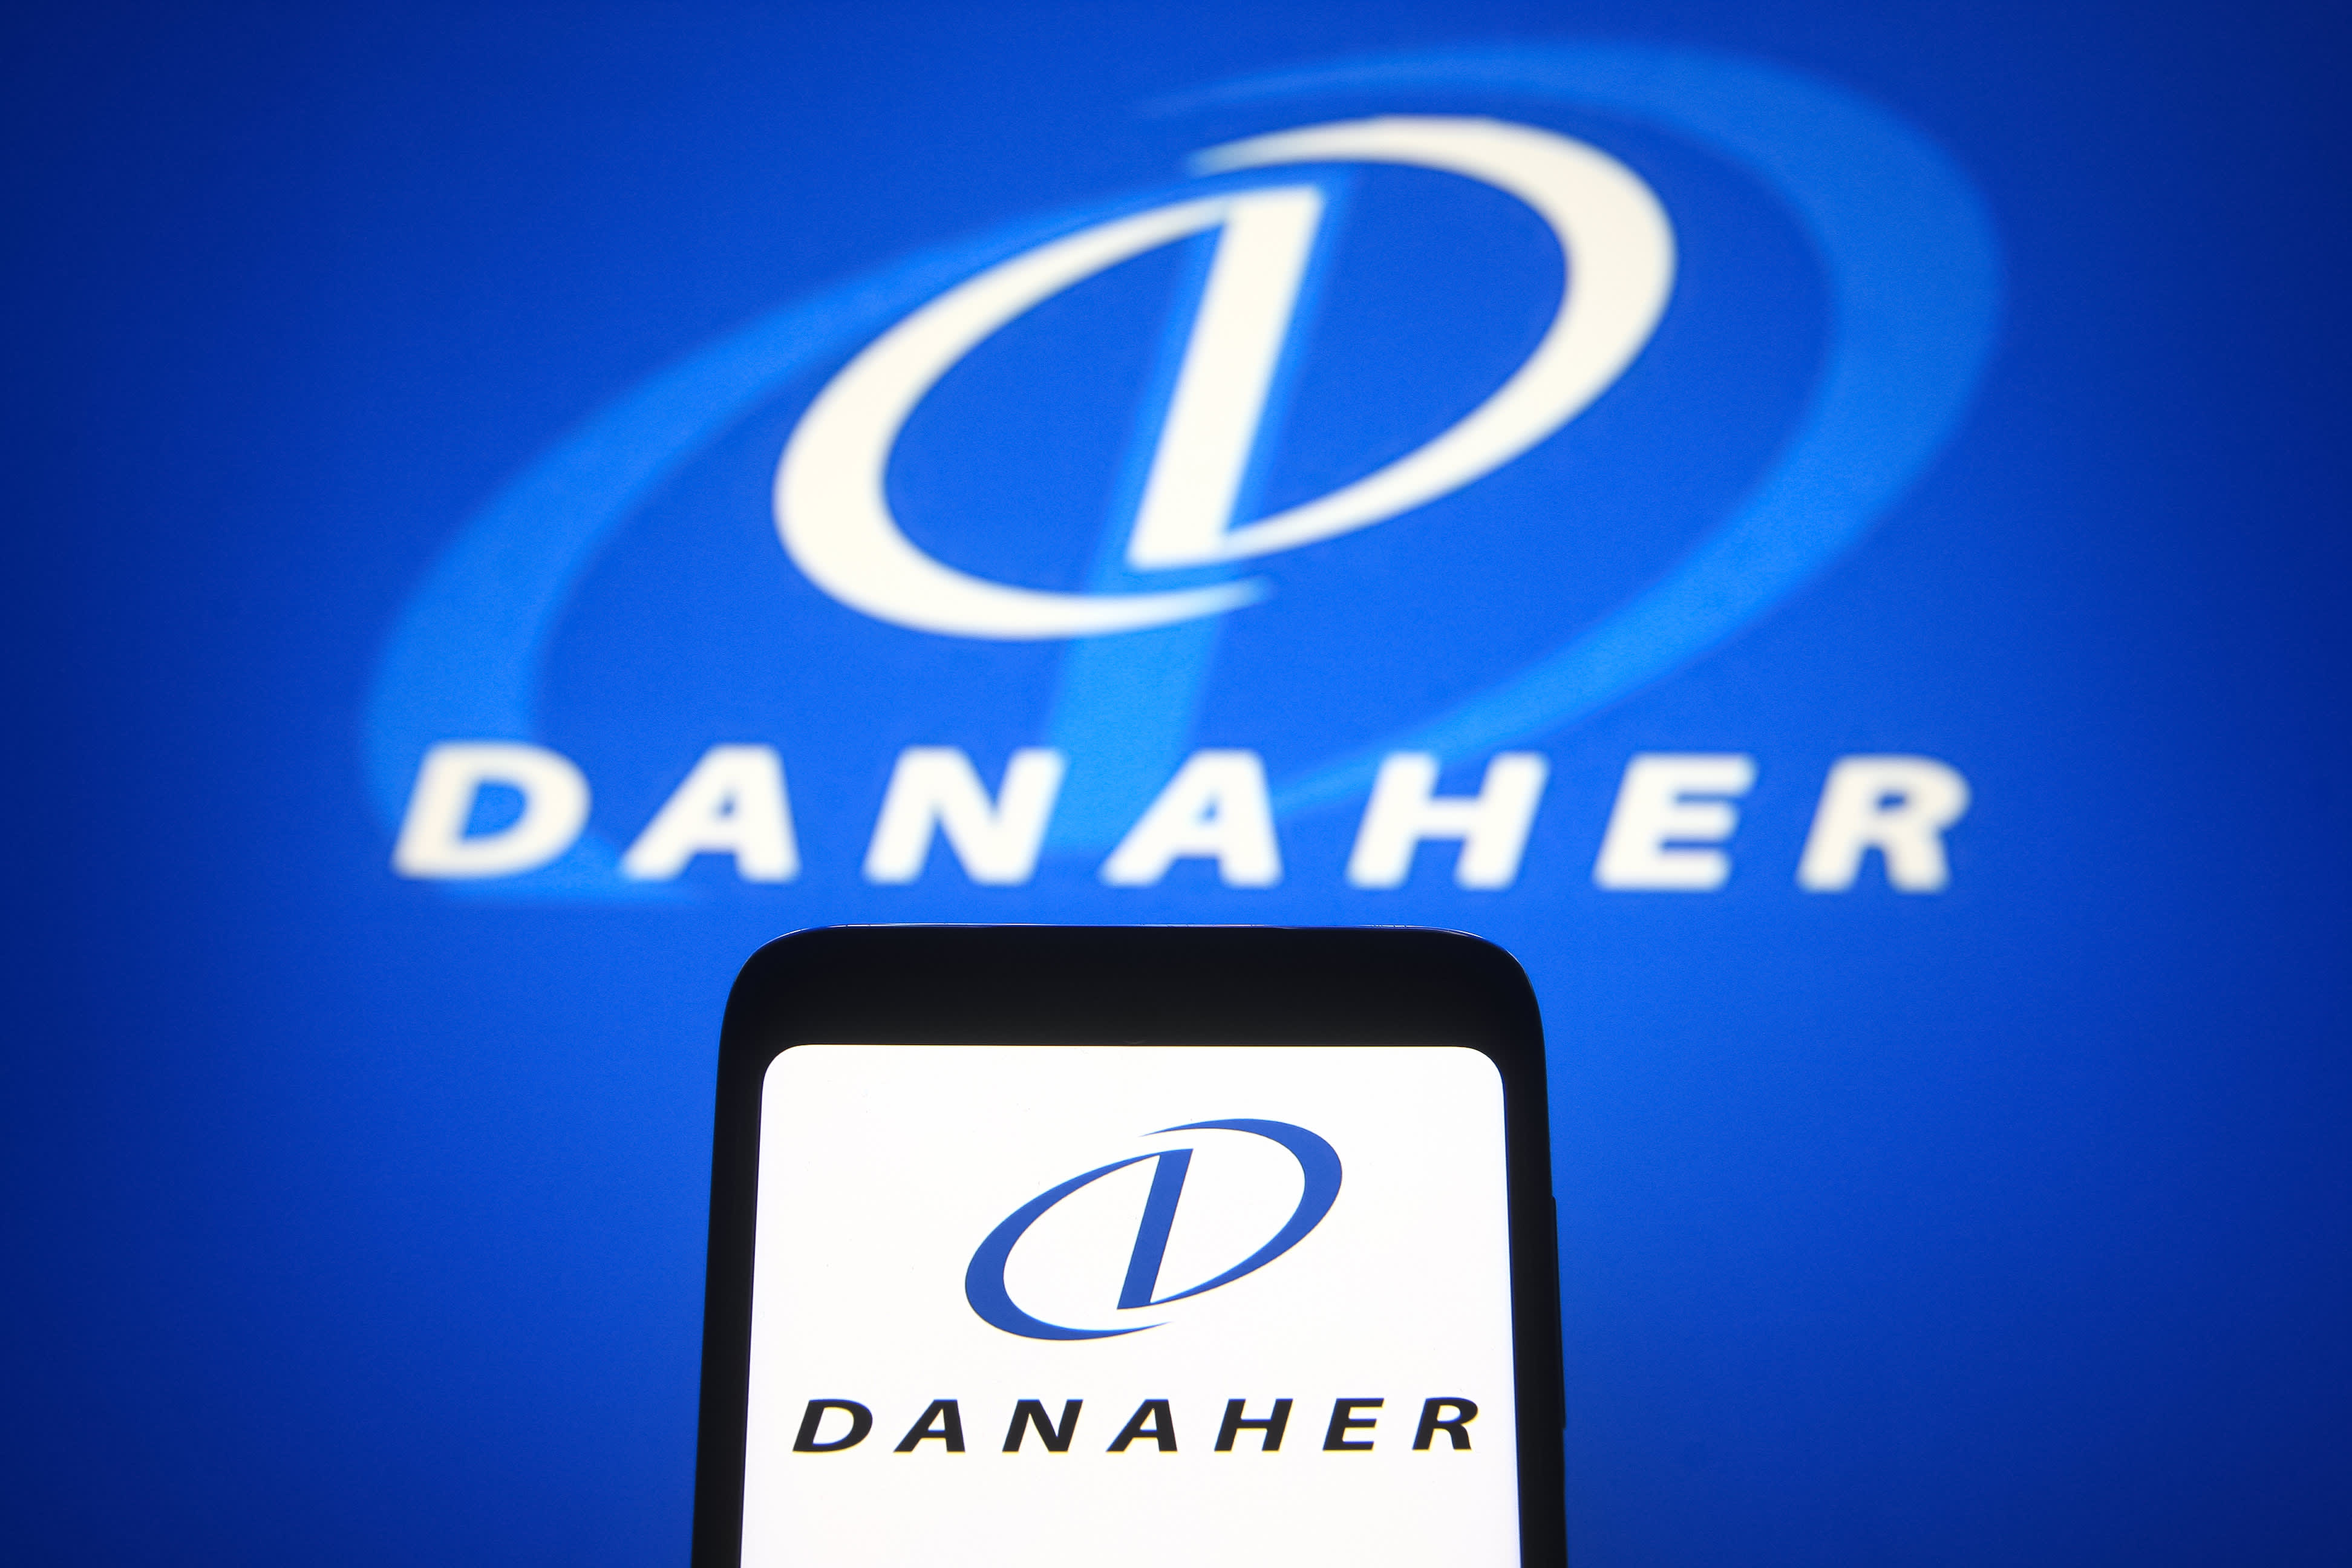 Danaher's disappointing guidance weighs on the stock — and forces us to reassess our investment case